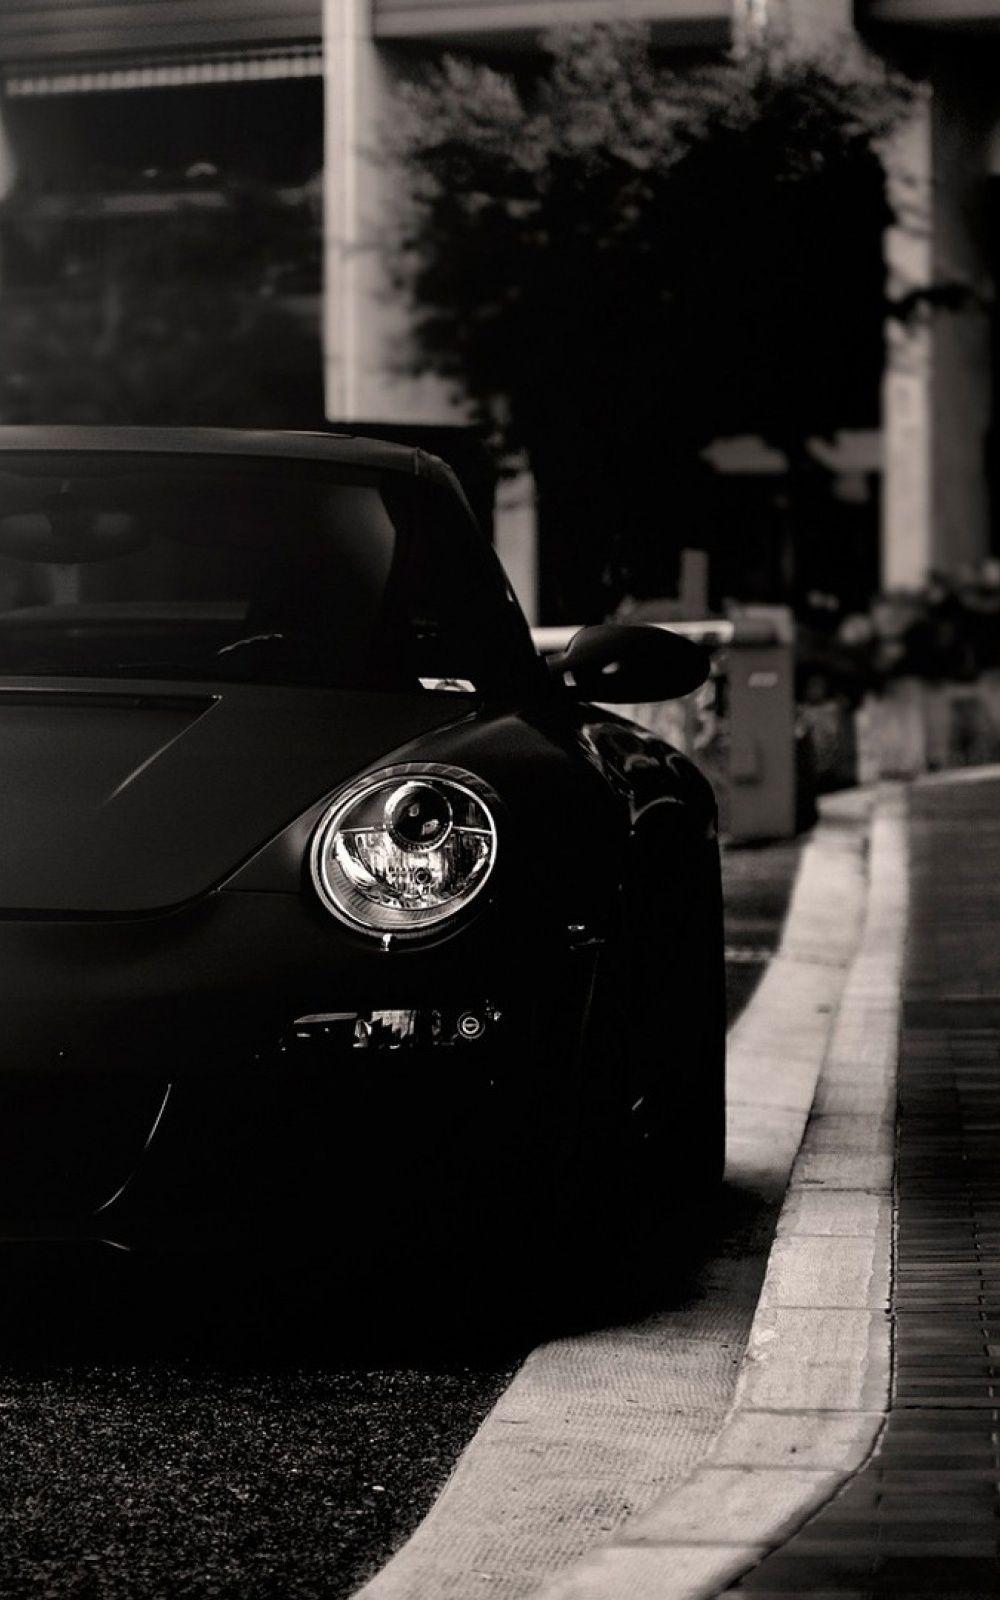 Black and White Car Wallpapers - Top Free Black and White Car